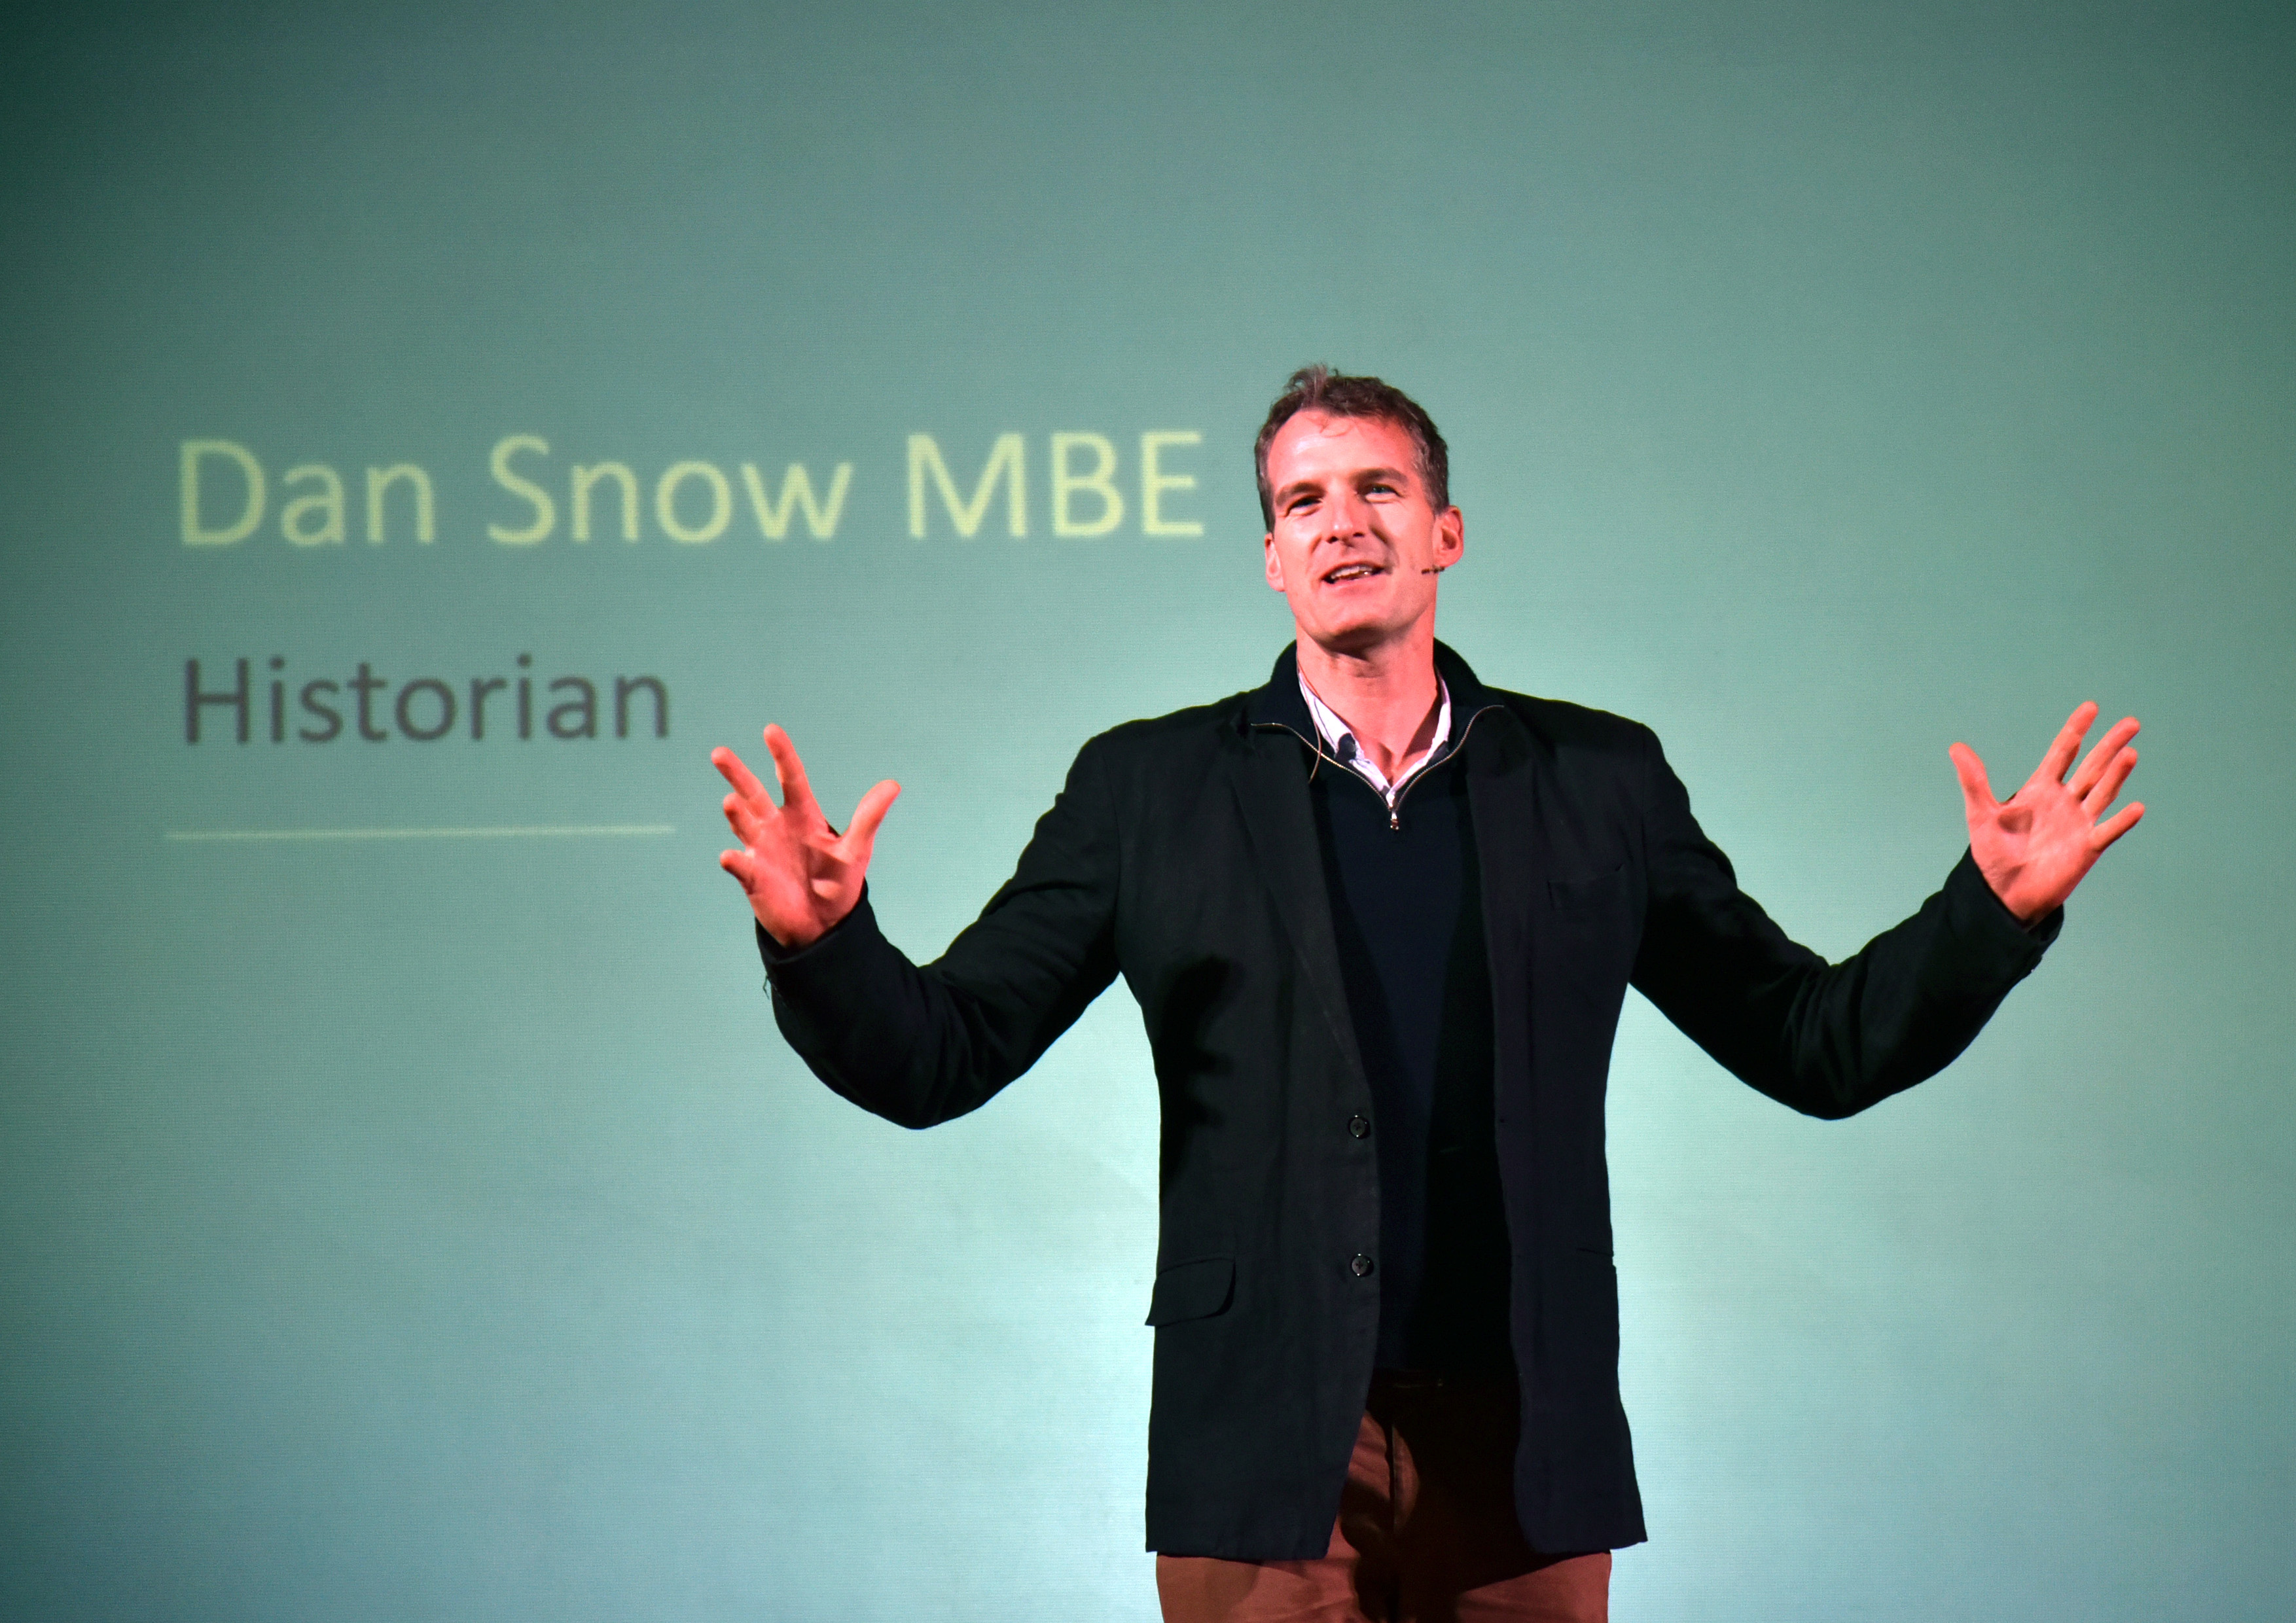 Dan Snow standing in front of a screen with his name on.